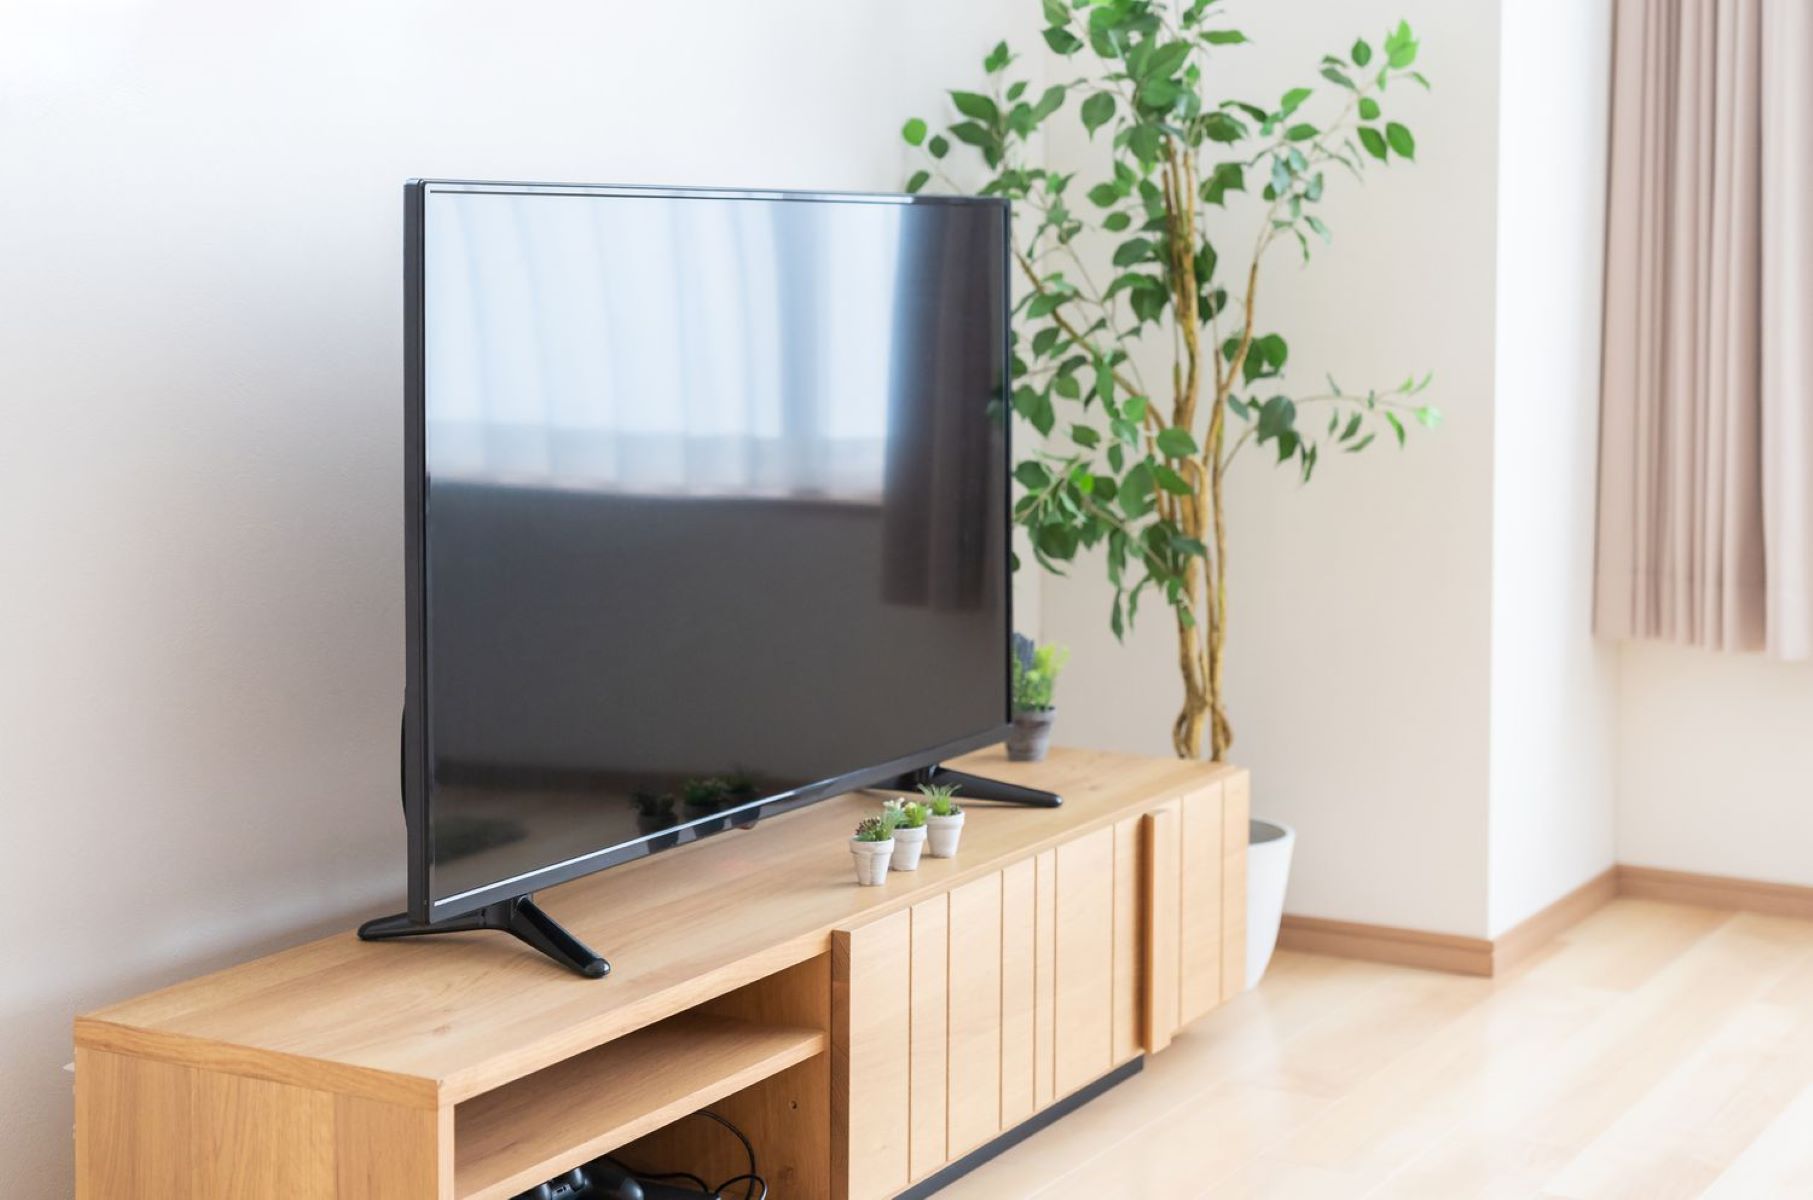 How To Decorate Around A TV Stand In The Living Room